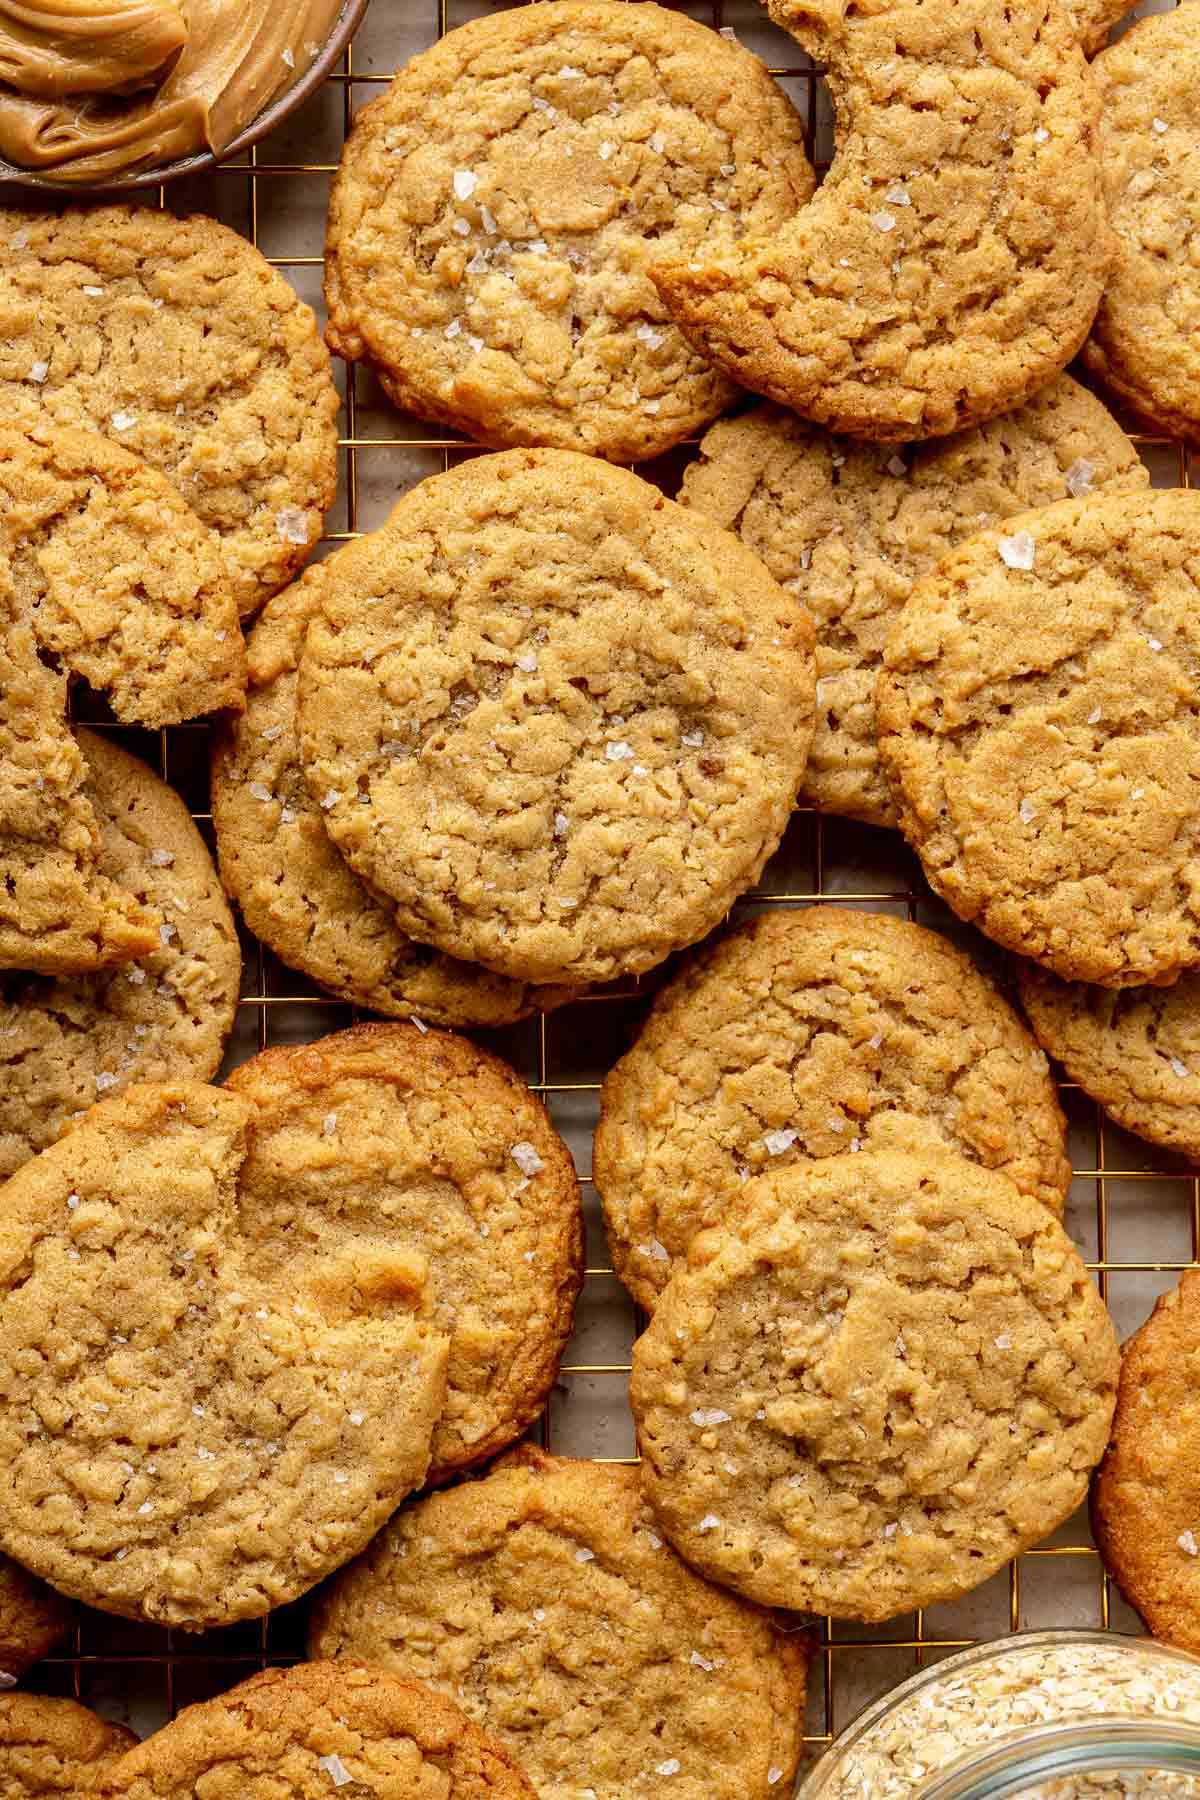 Peanut butter oatmeal cookies stacked on a parchment paper.